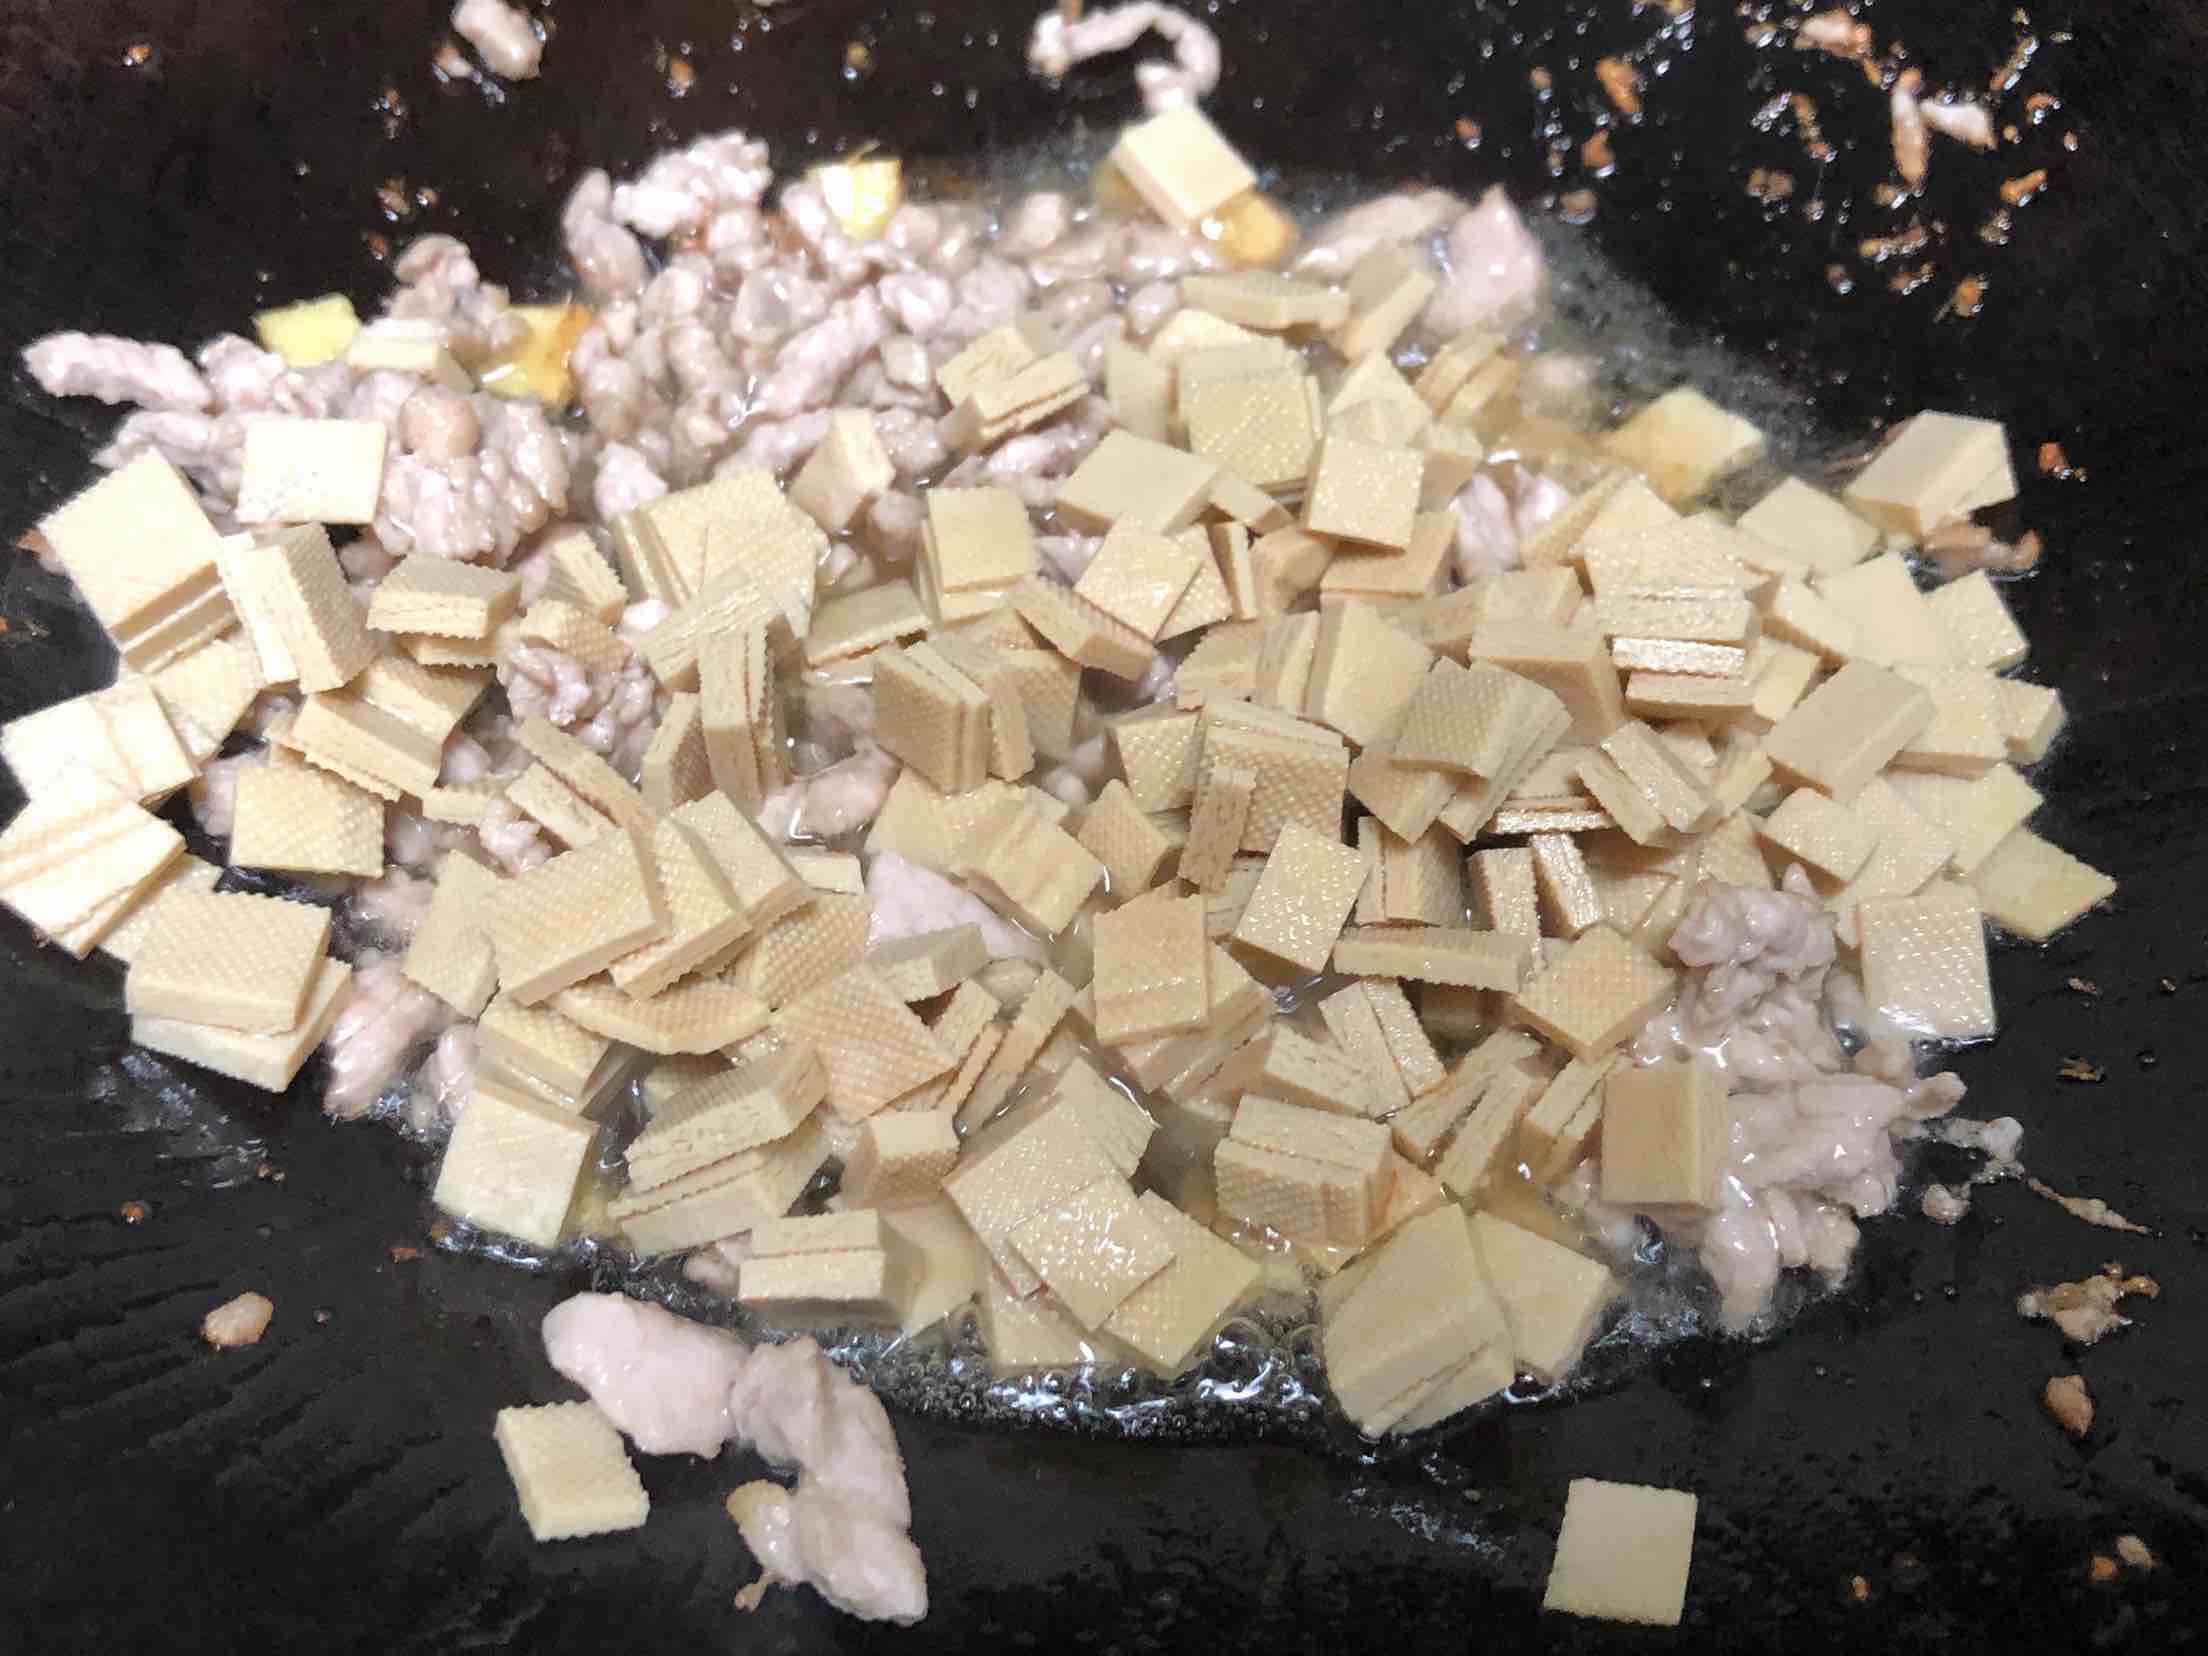 Stir-fried Dried Bean Curd with Garlic Sprouts recipe